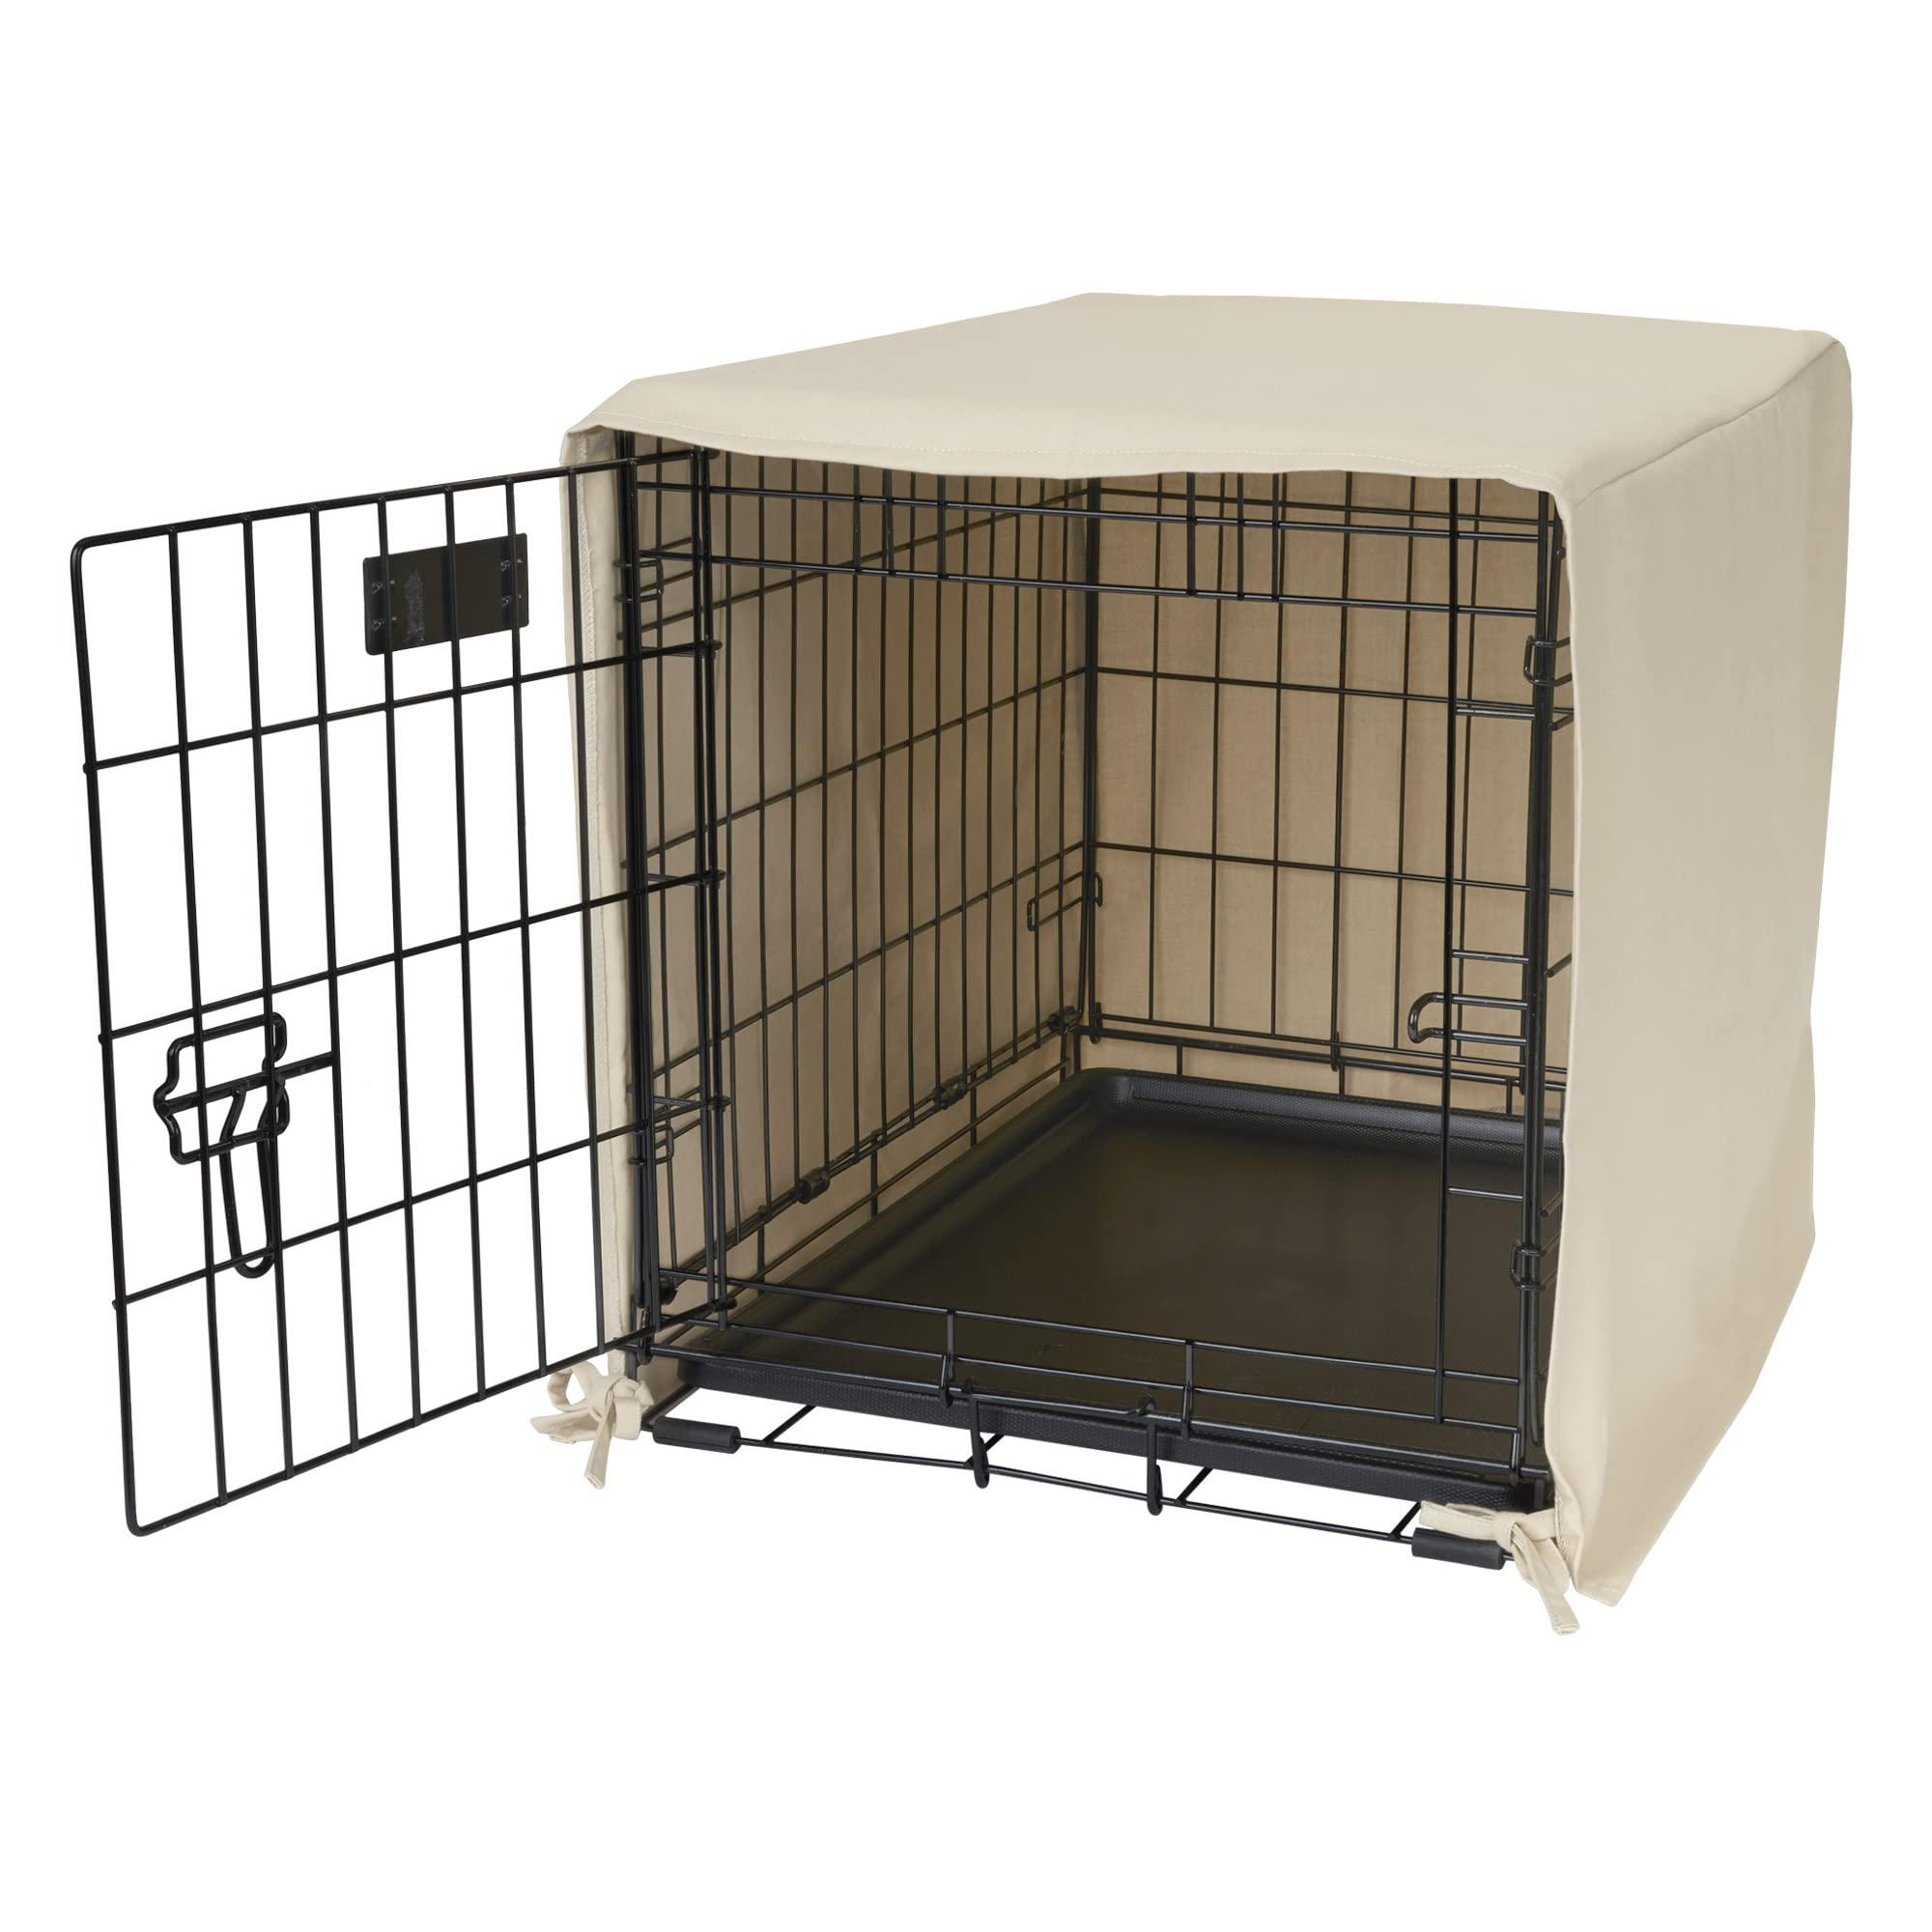 Pet Dreams Breathable Crate Cover - Dog Crate Cover for Single Door Wire Dog Crate, Eco Friendly Dog Kennel Cover, Non Toxic Washable Cover (Khaki Tan, Medium 30 Inch Kennel Cover)